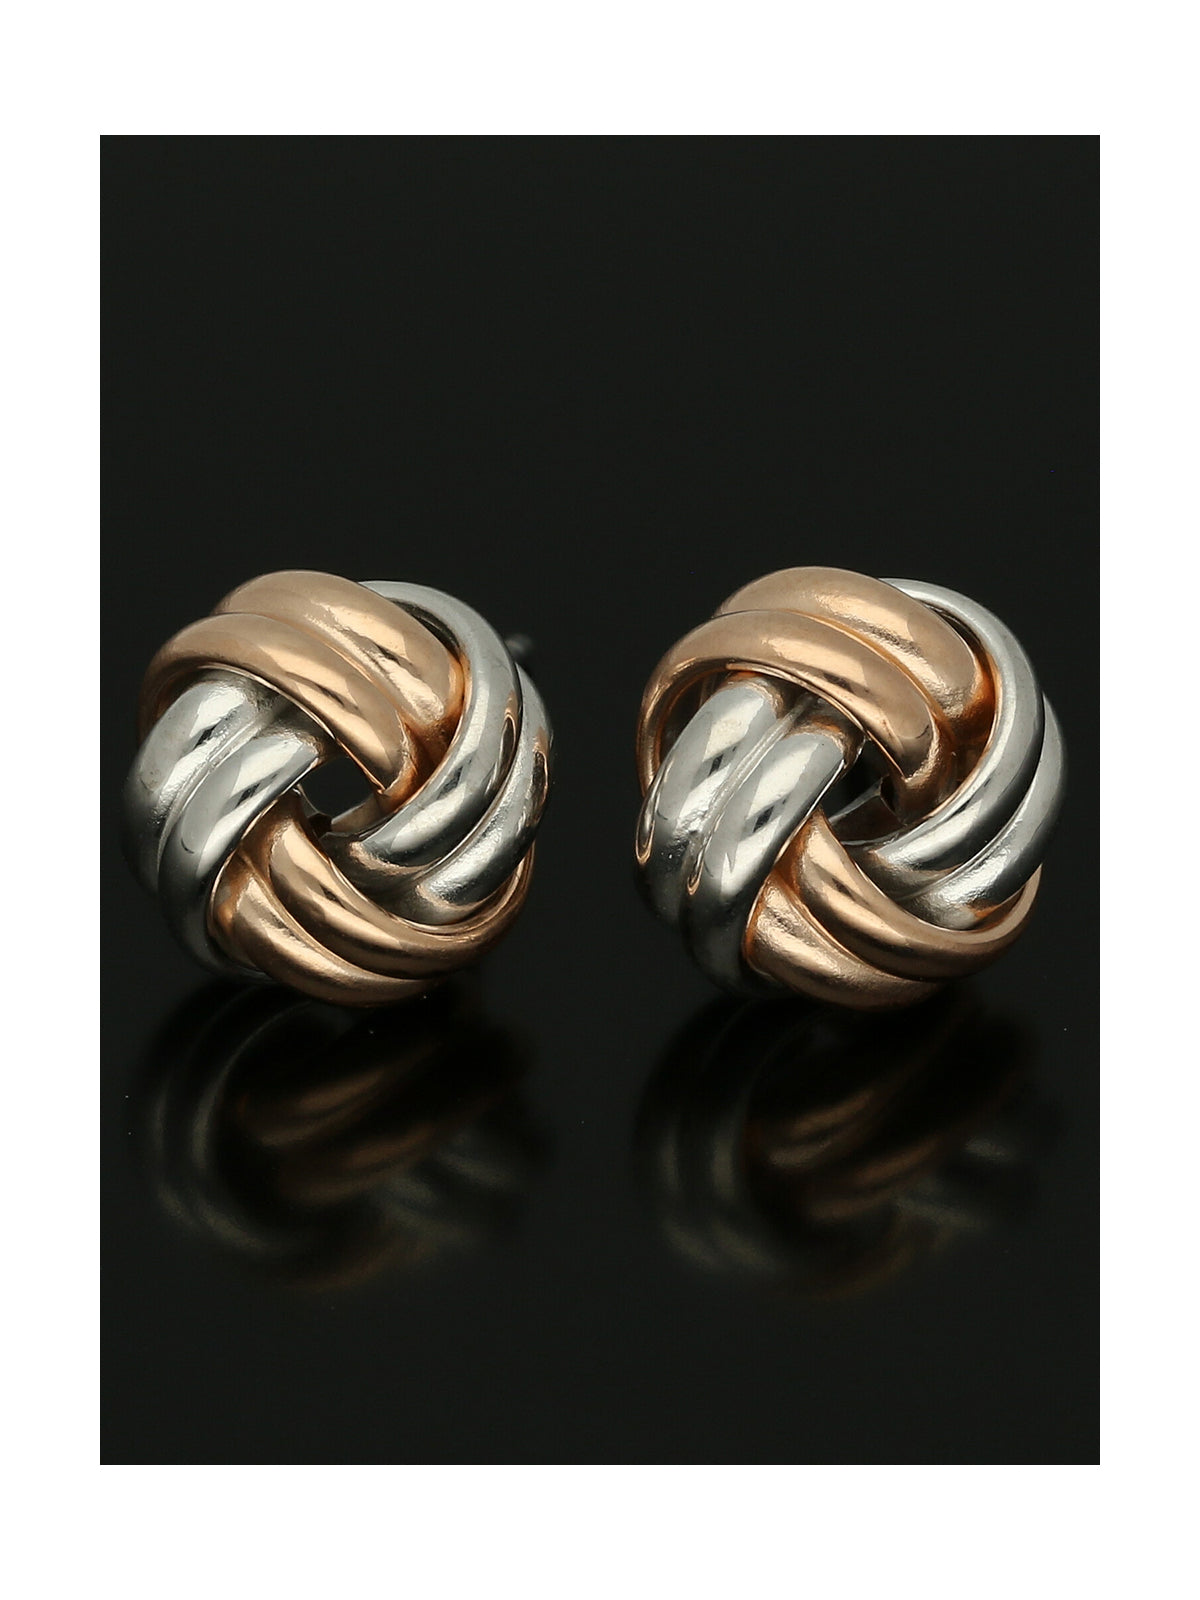 Four Strand Knot Stud Earrings in 9ct White & Rose Gold